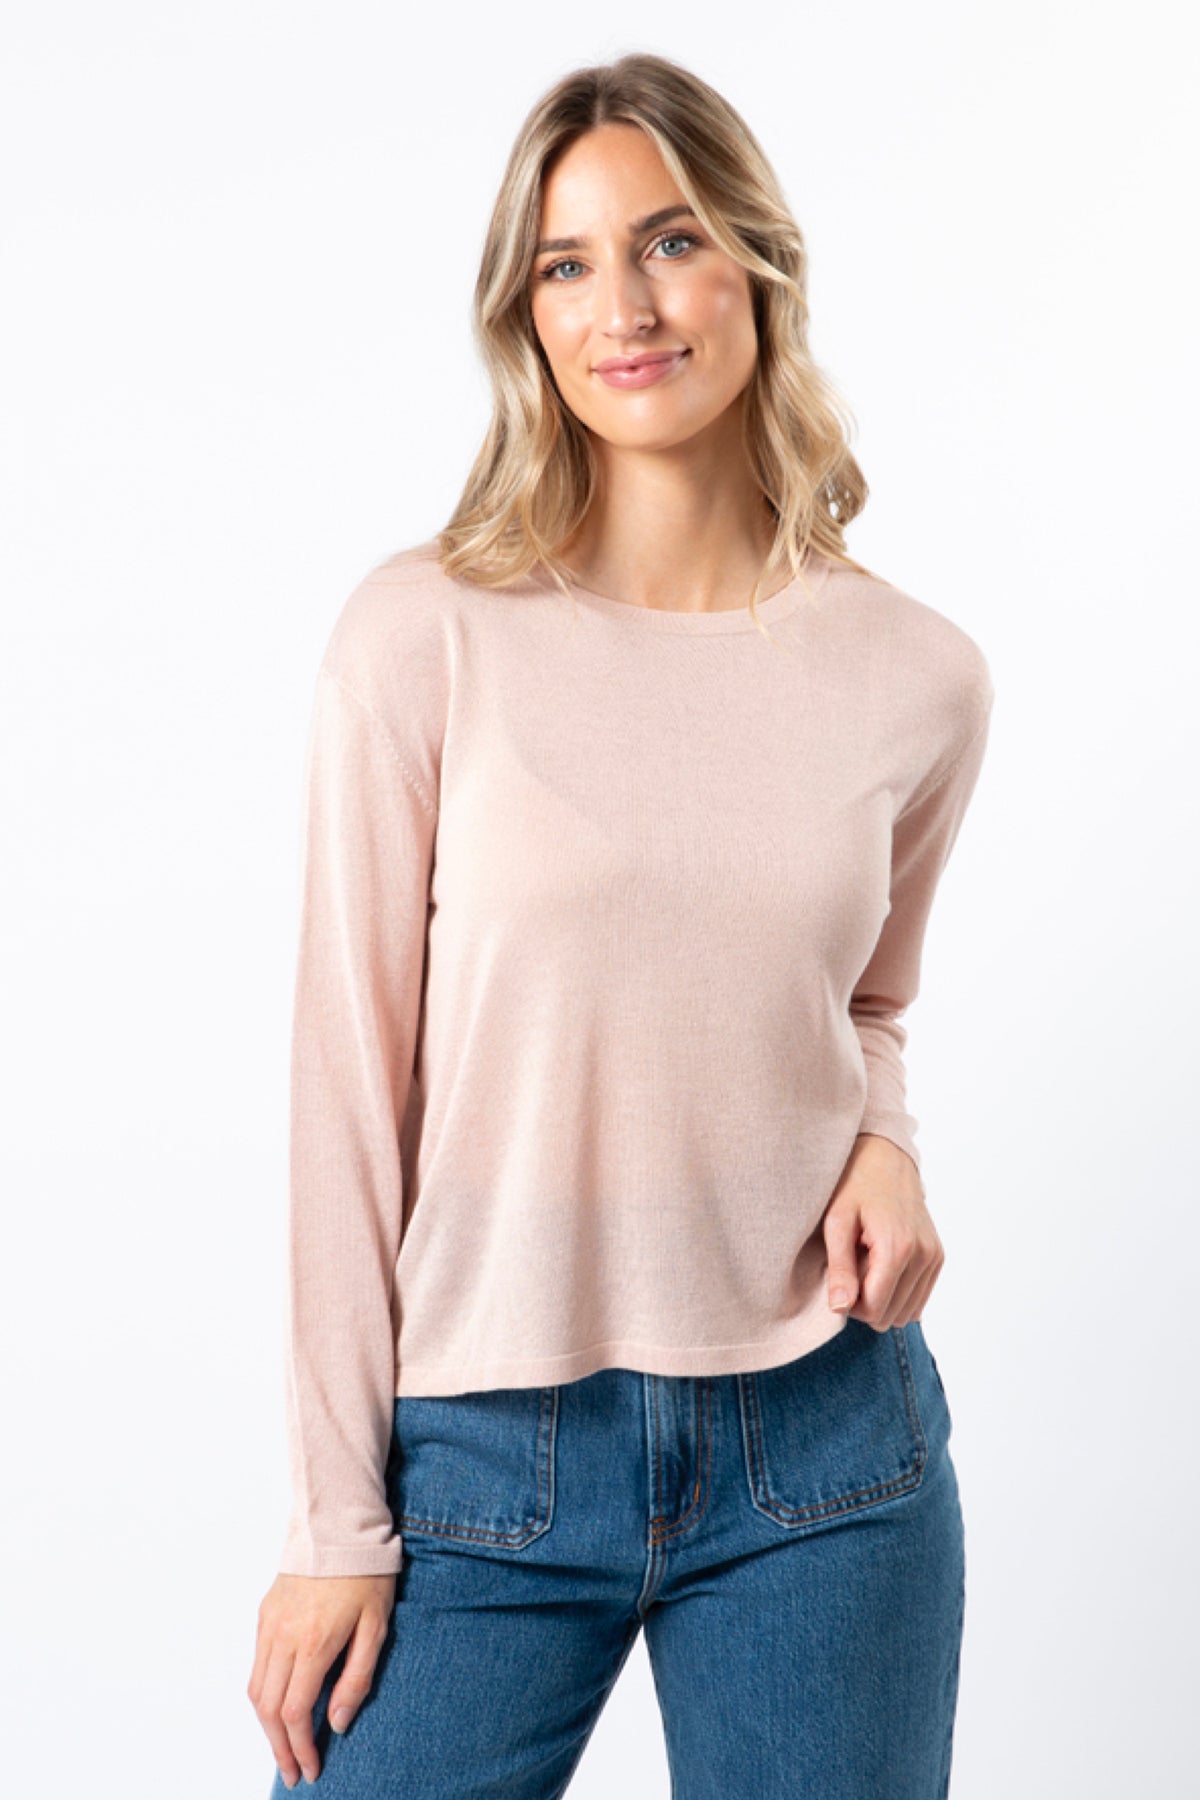 Shimmer Top Rose - PREORDER DELIVERY EARLY JUNE